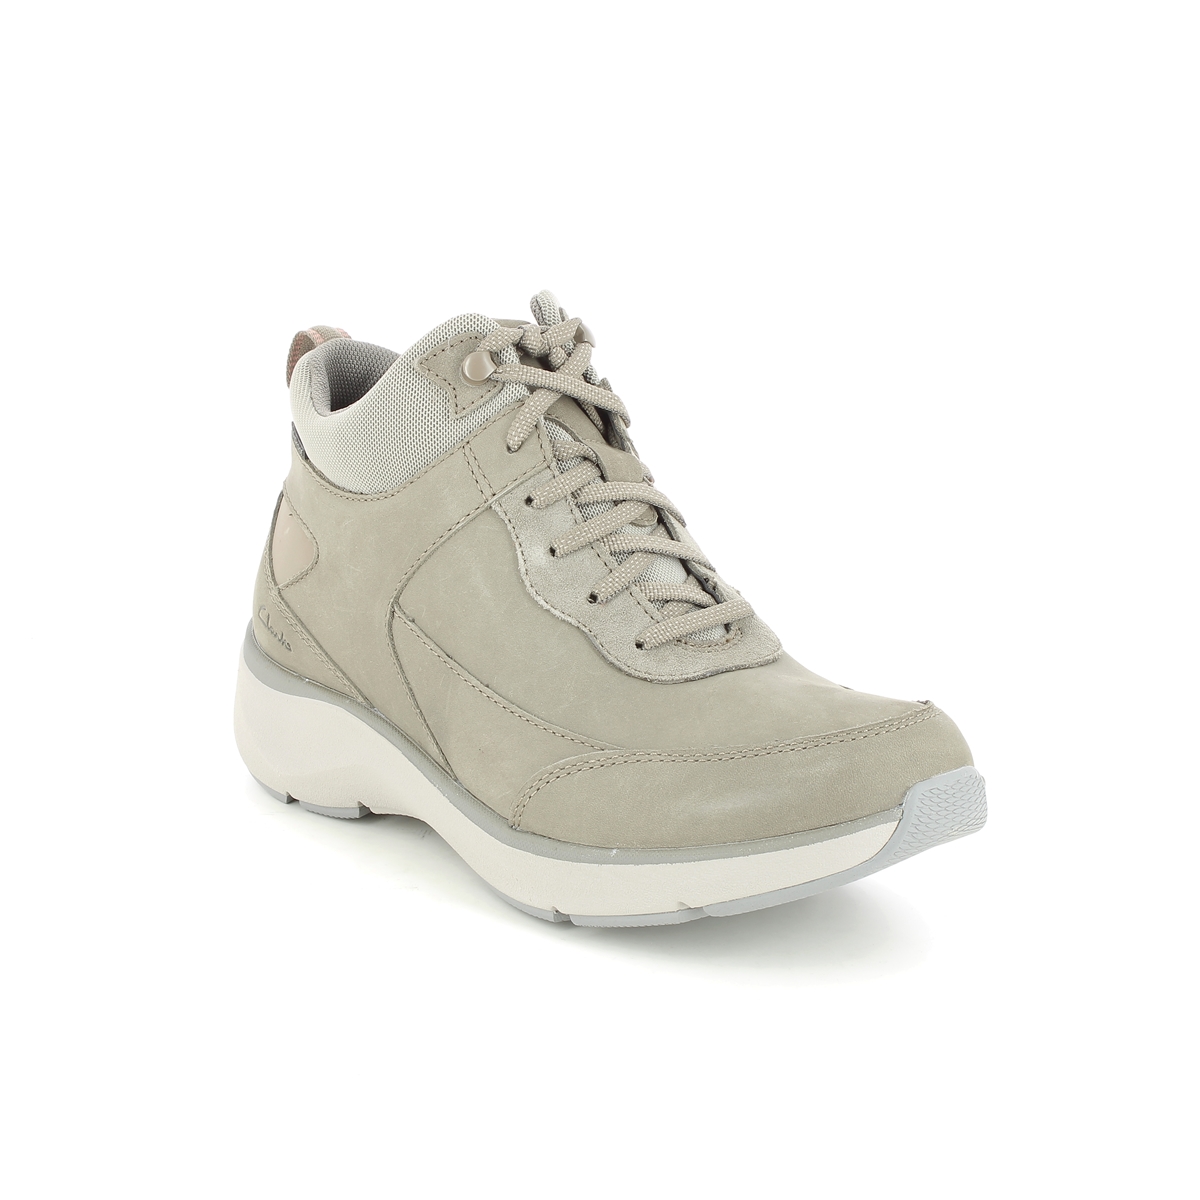 Clarks Wave 2 Mid Tex Taupe Nubuck Womens Walking Boots 536585E In Size 4.5 In Plain Taupe Nubuck E Width Fitting Narrow Fit